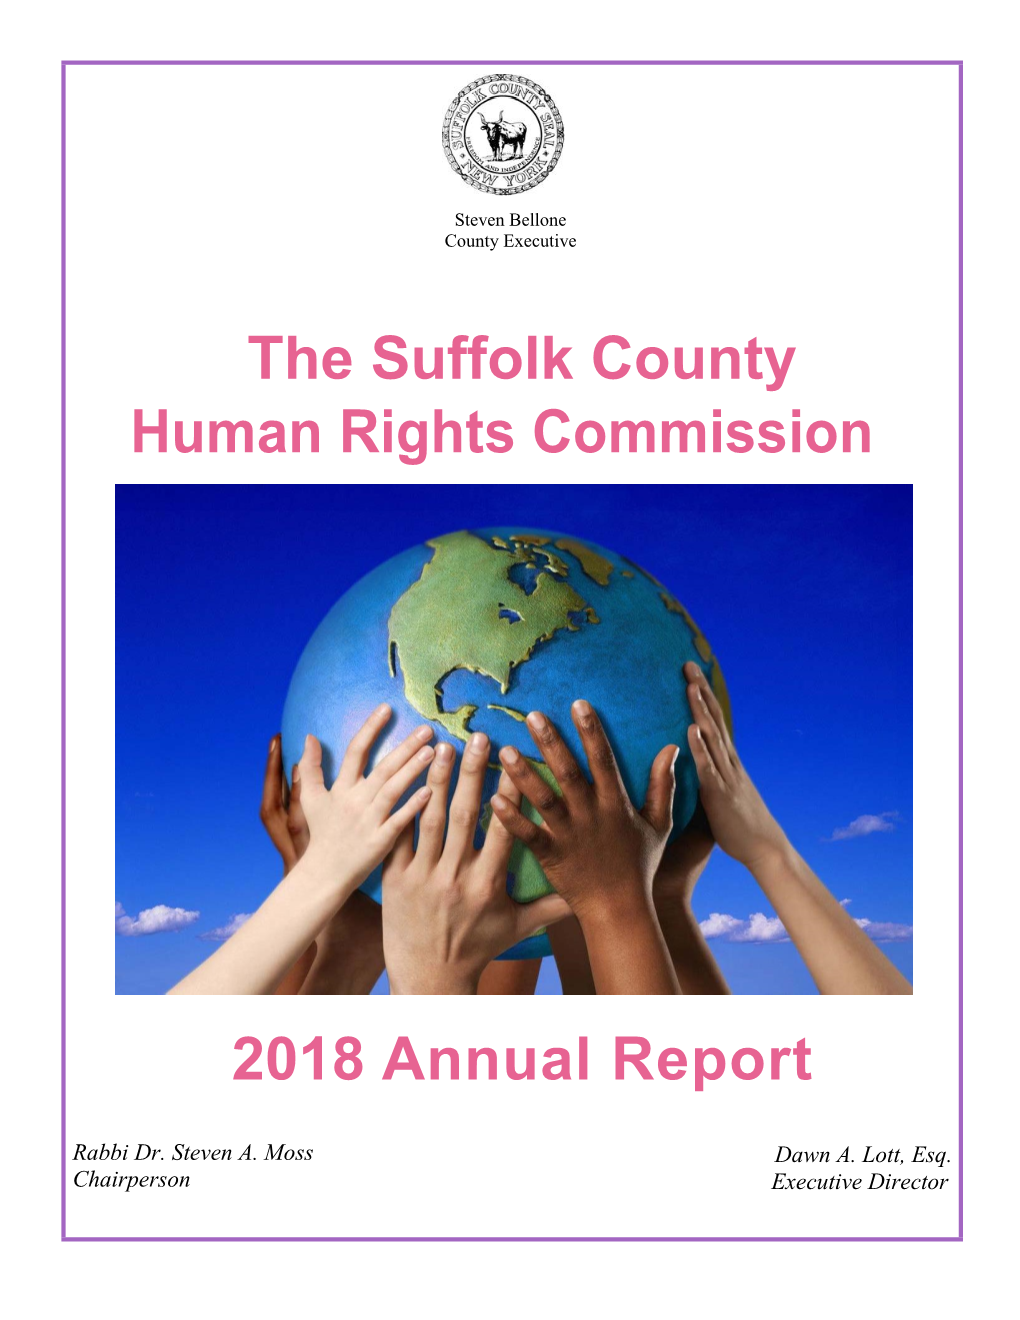 The Suffolk County Human Rights Commission 2018 Annual Report